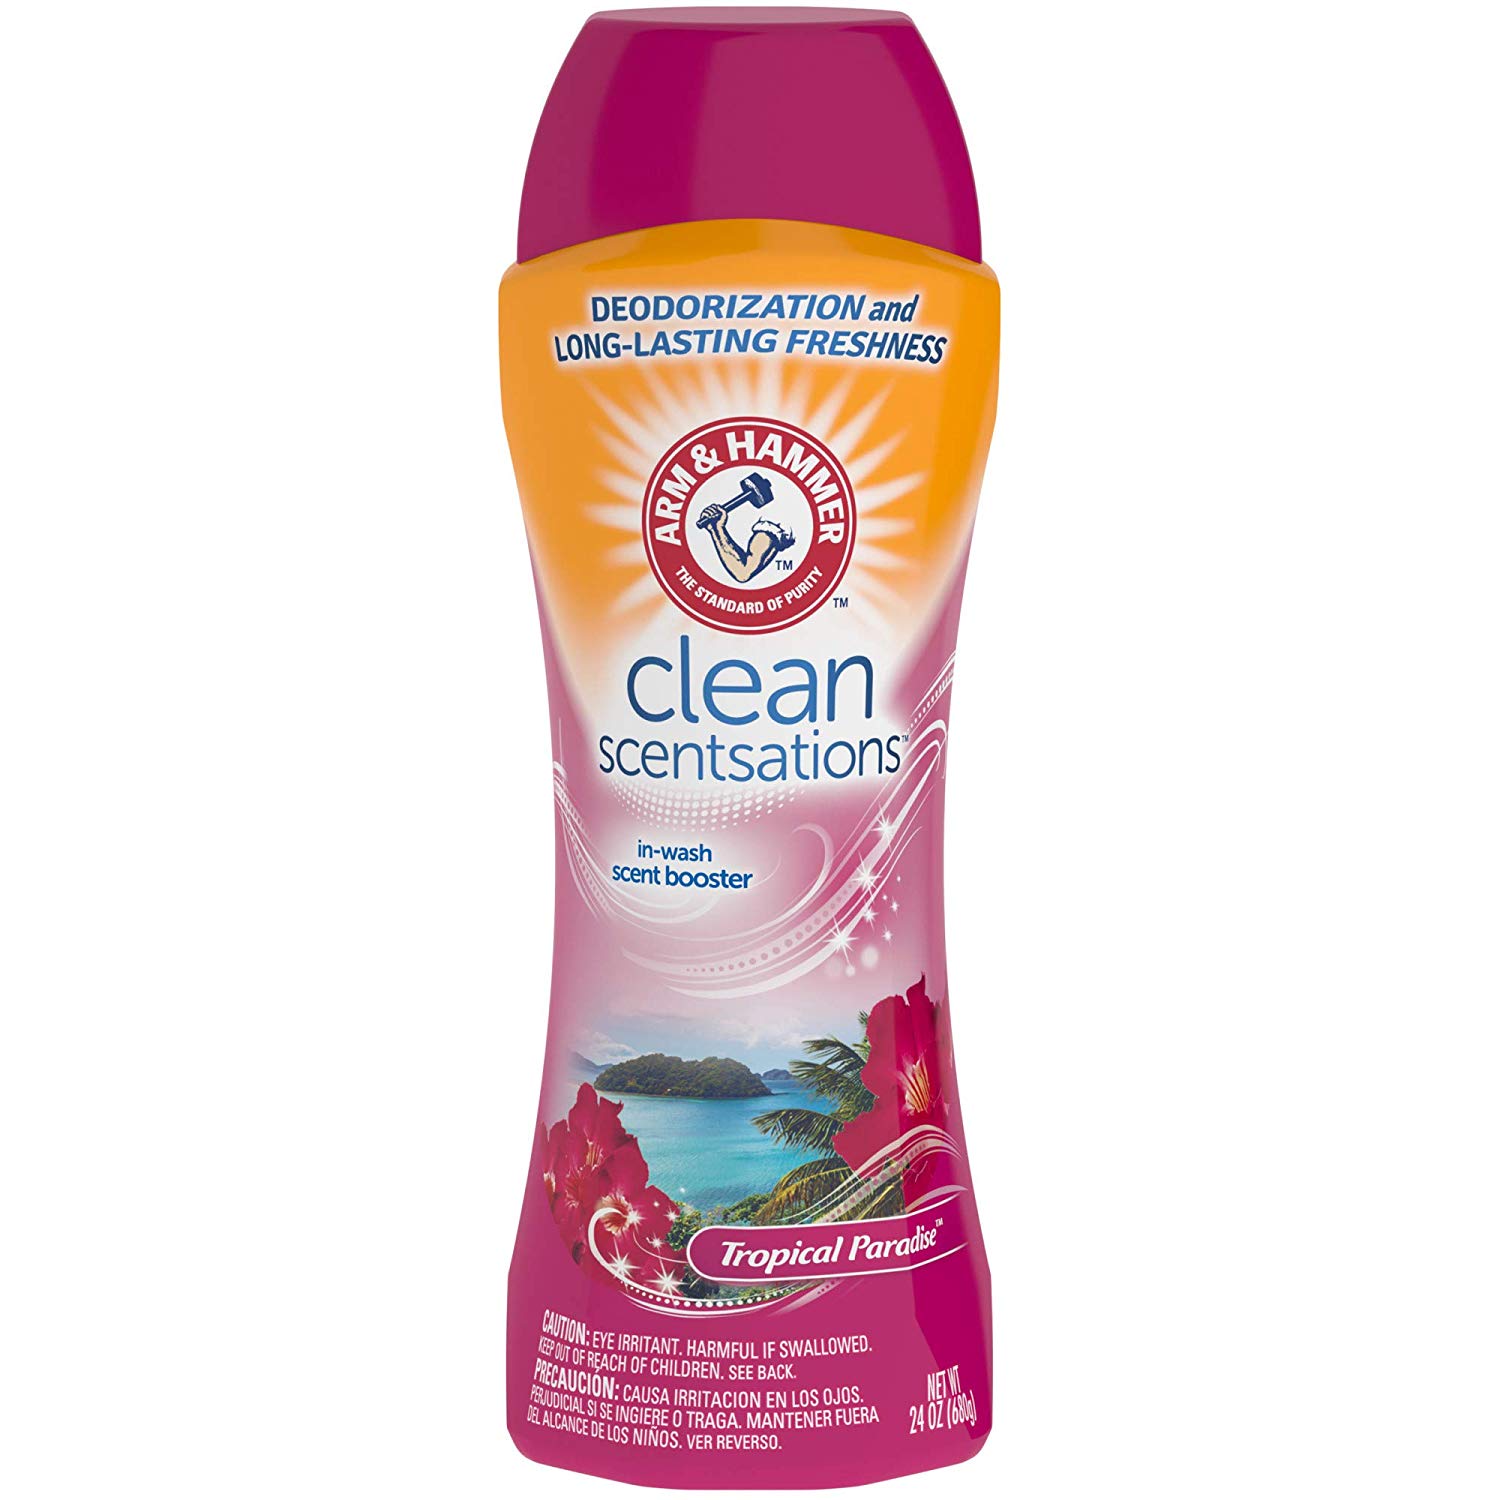 arm-hammer-clean-scentsations-in-wash-freshness-booster-24-ounce-as